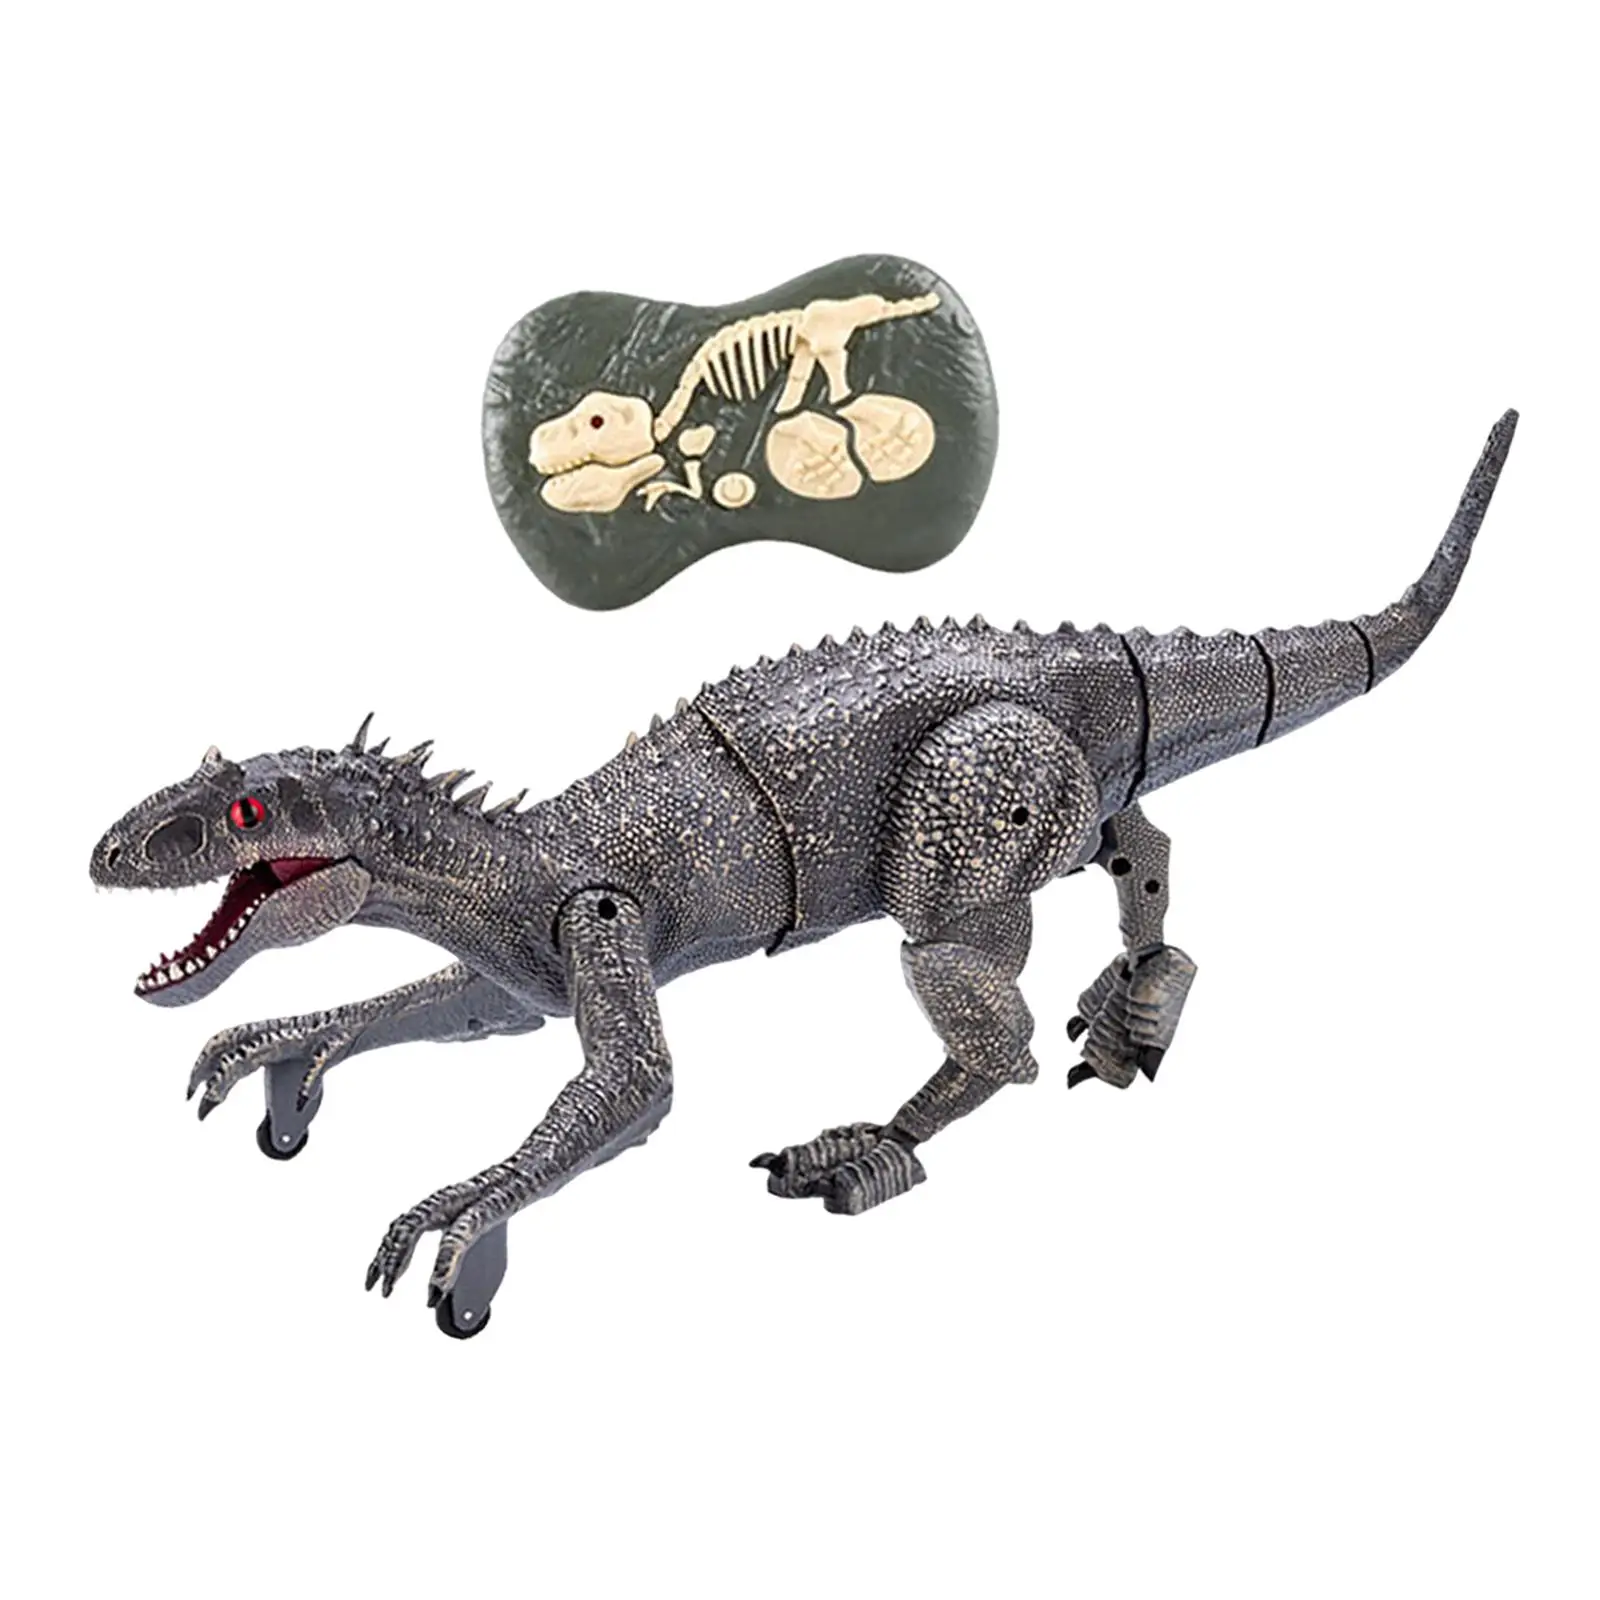 LED Eyes Remote Control Walking Dinosaur Toy for Kids Years Old